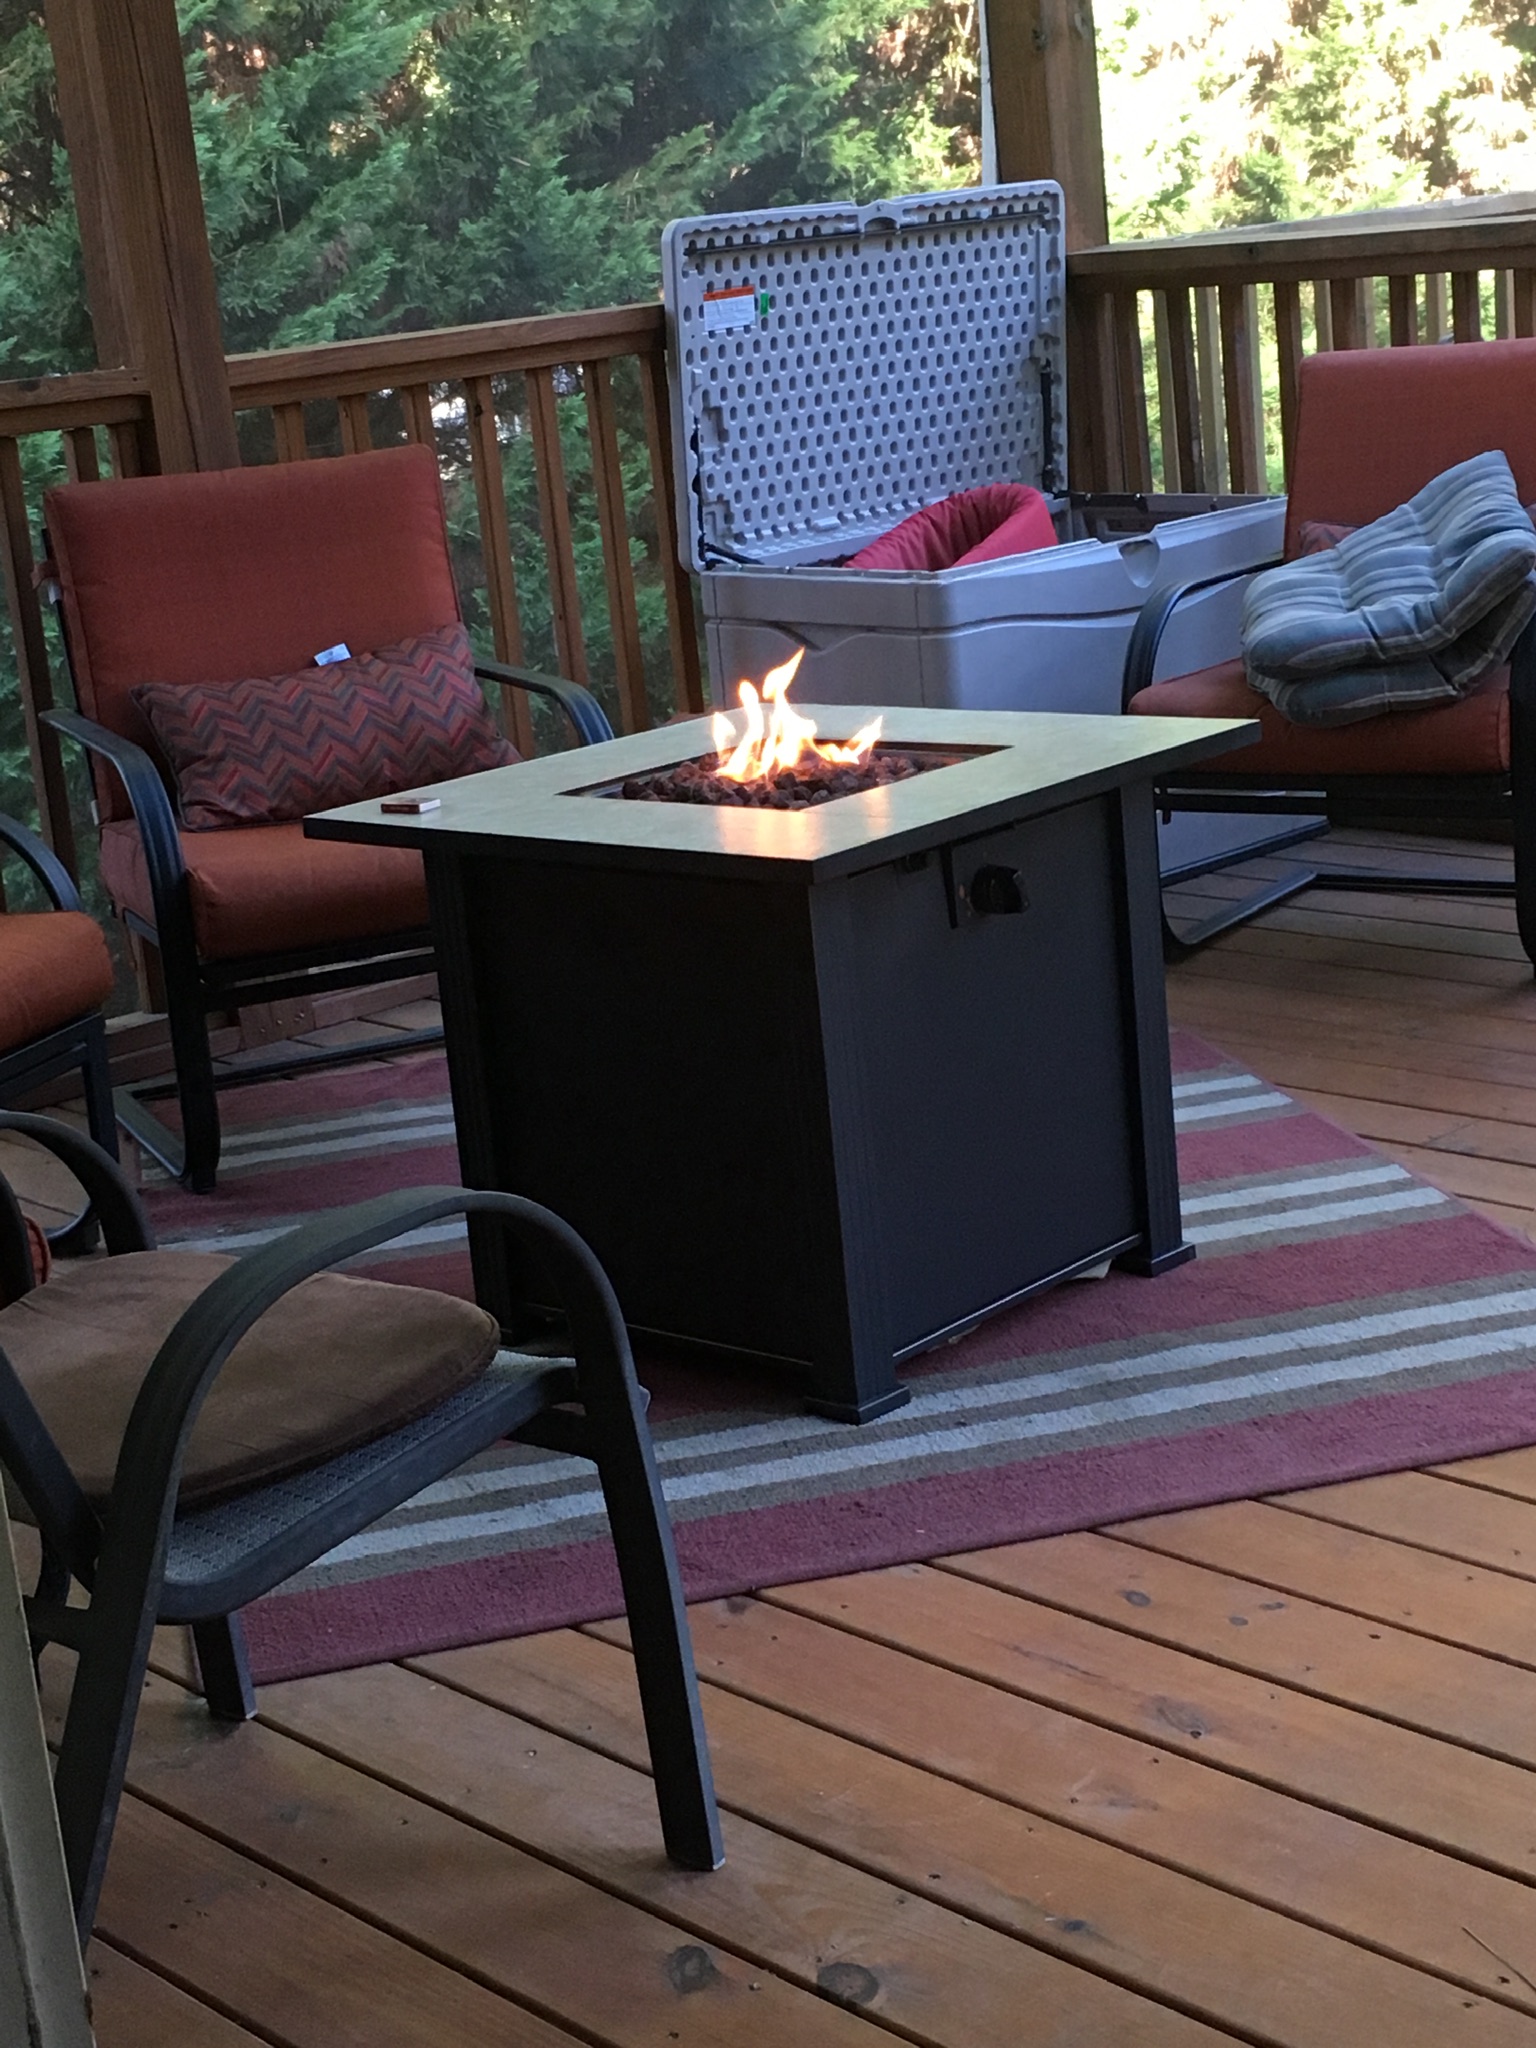 Propane Fire Pit In Screened Porch, Is It Safe To Have A Propane Fire Pit On Deck